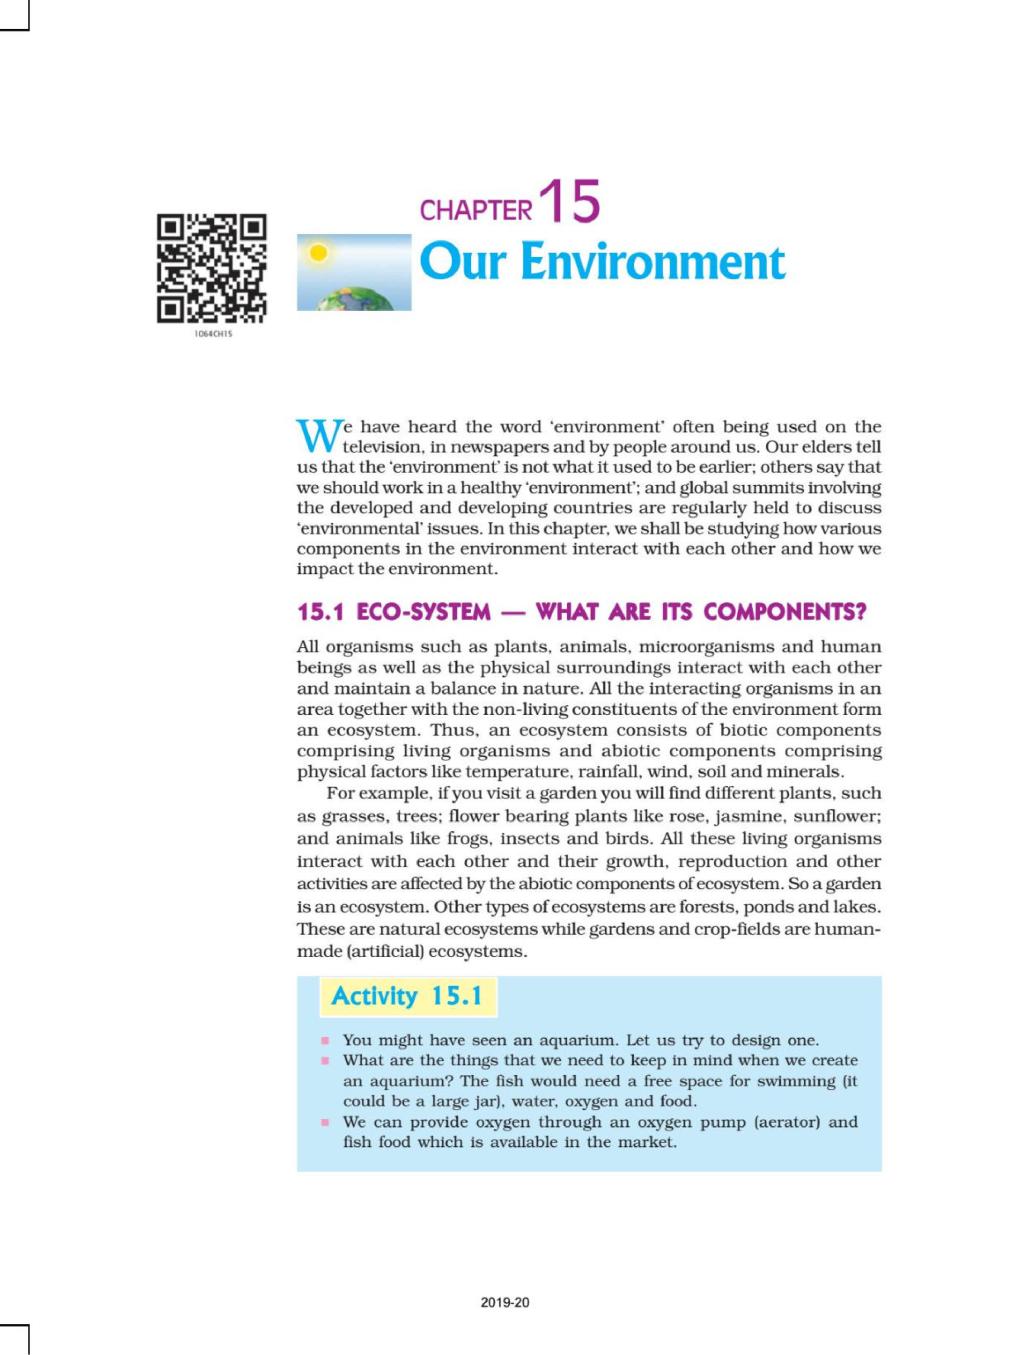 NCERT Book Class 10 Science Chapter 15 Our Environment - Page 1